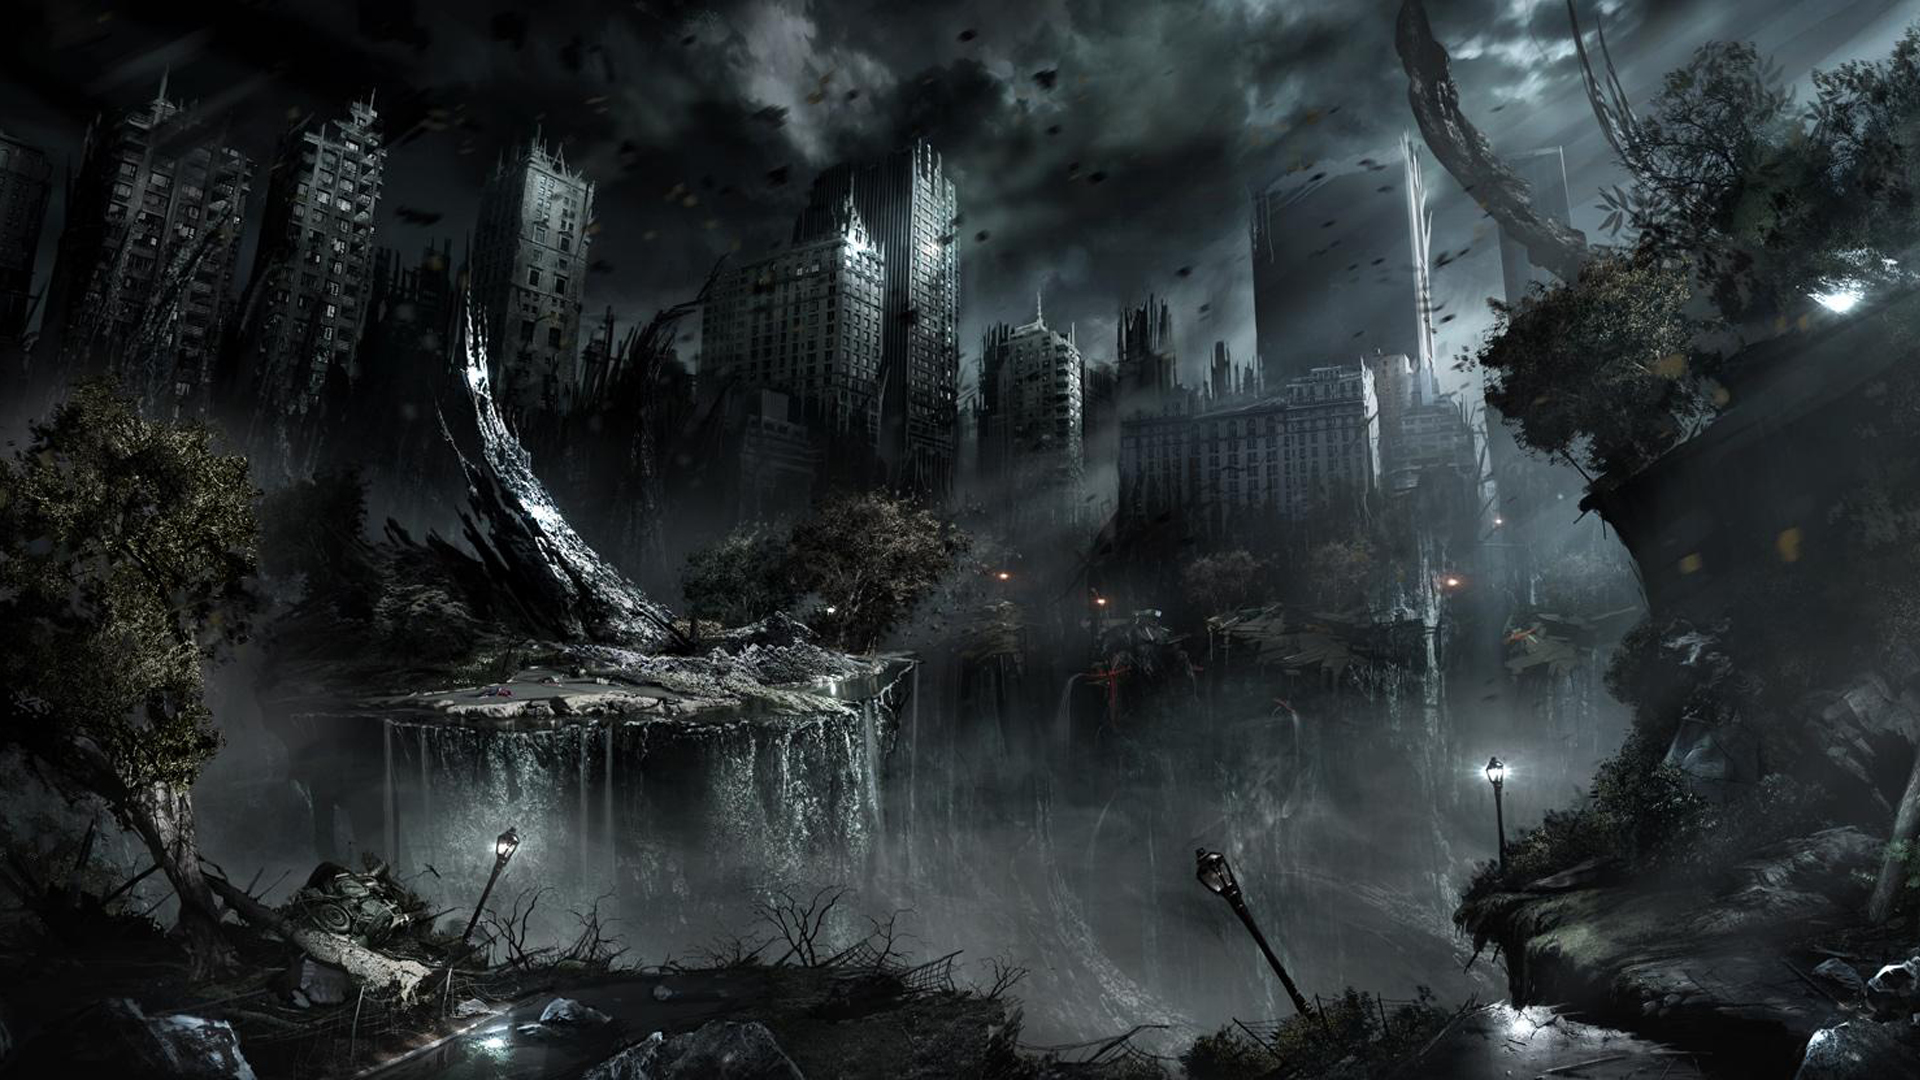 Post Apocalyptic Landscape Wallpapers